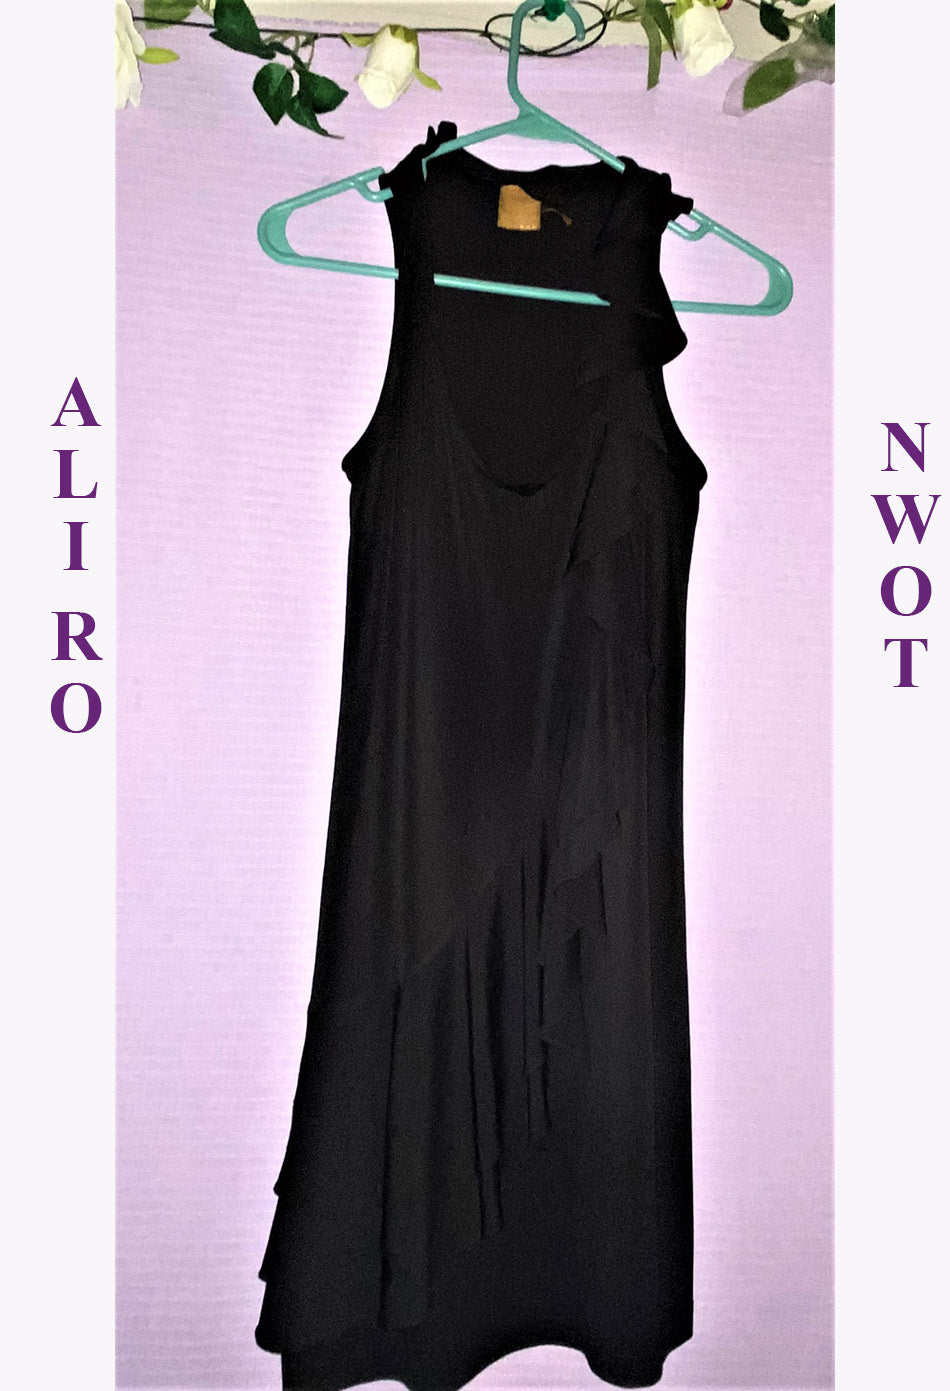 NWOT ALI RO BLACK SLEEVELESS DRESS THAT IS A SIZE 0 GENEROUS STRETCH🌹